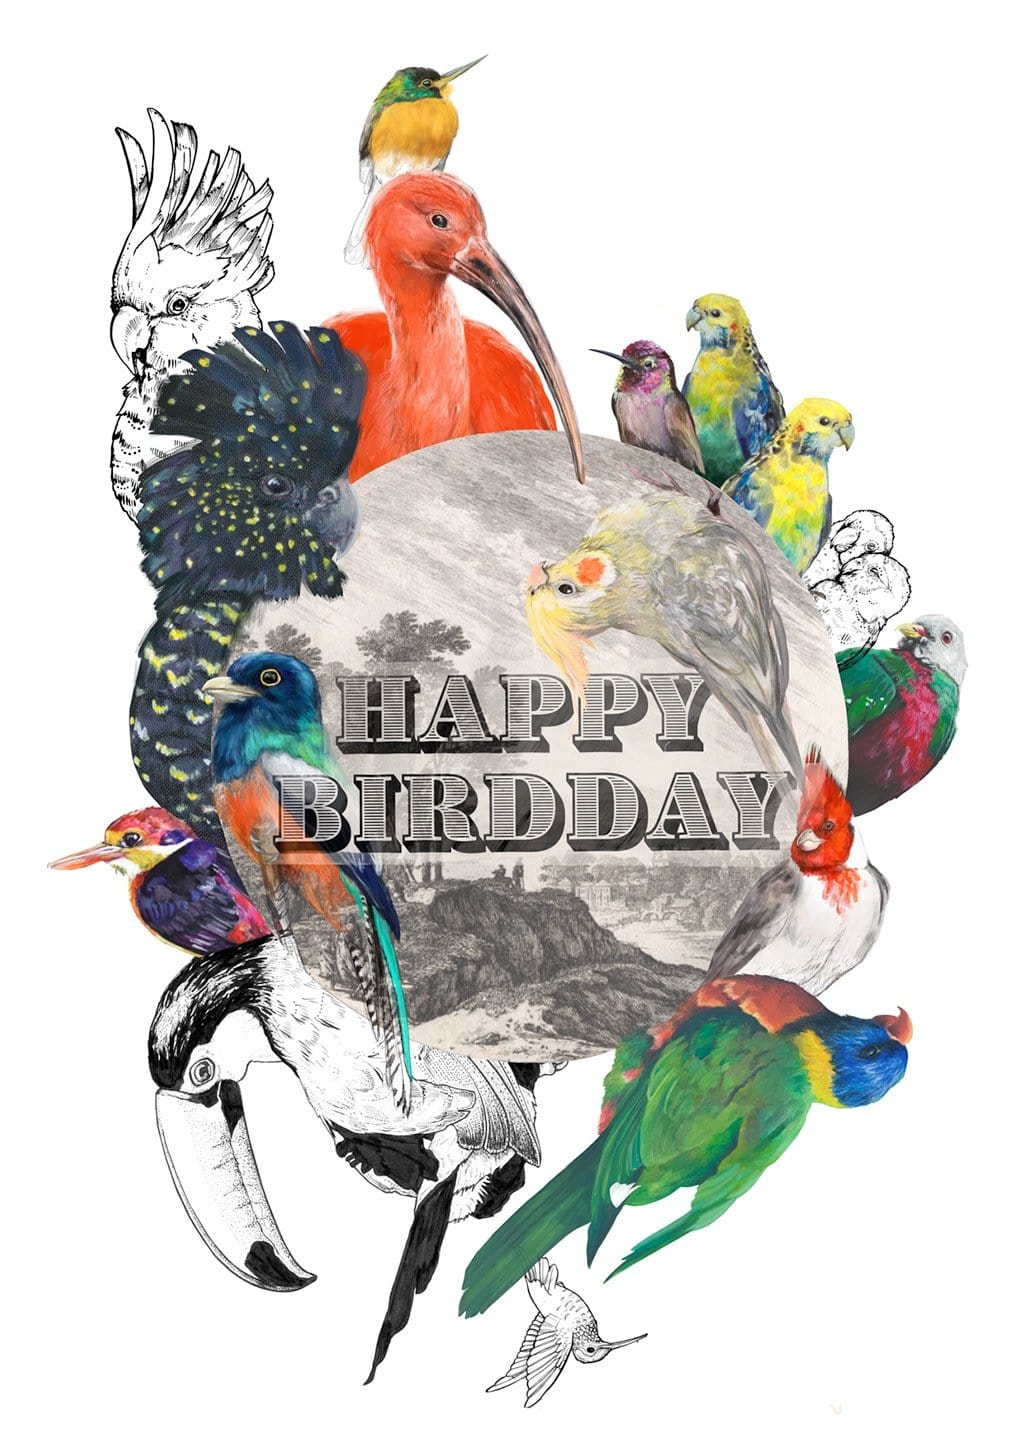 Happy Birdday Greeting Card Food, Fur & Feathers Greeting Cards Card